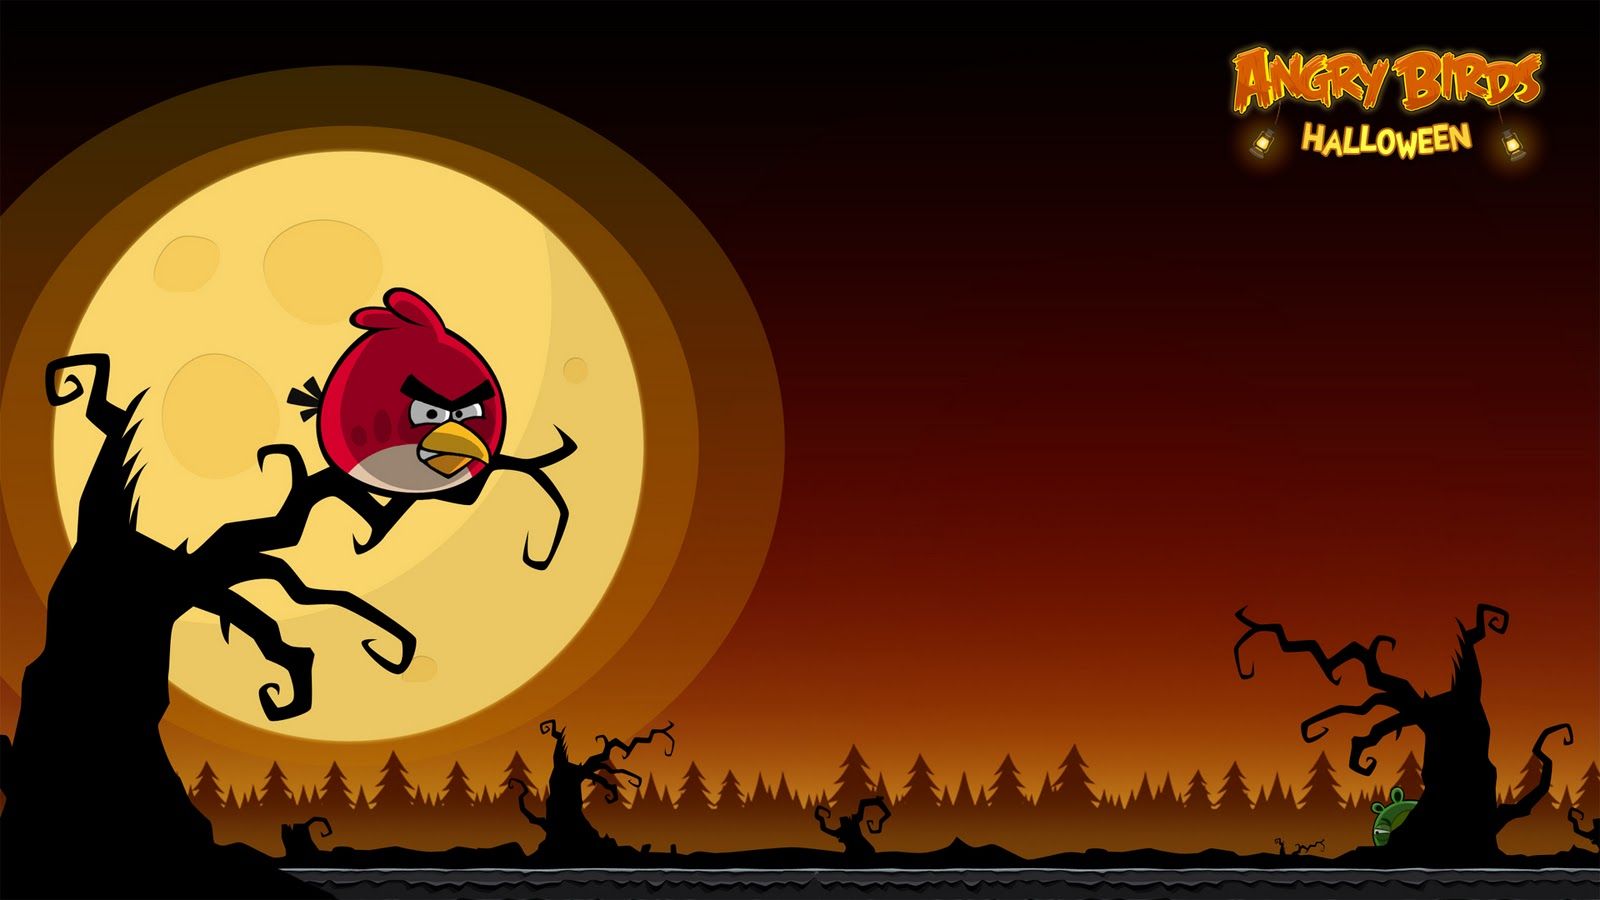 30 Awesome Angry Birds Resources